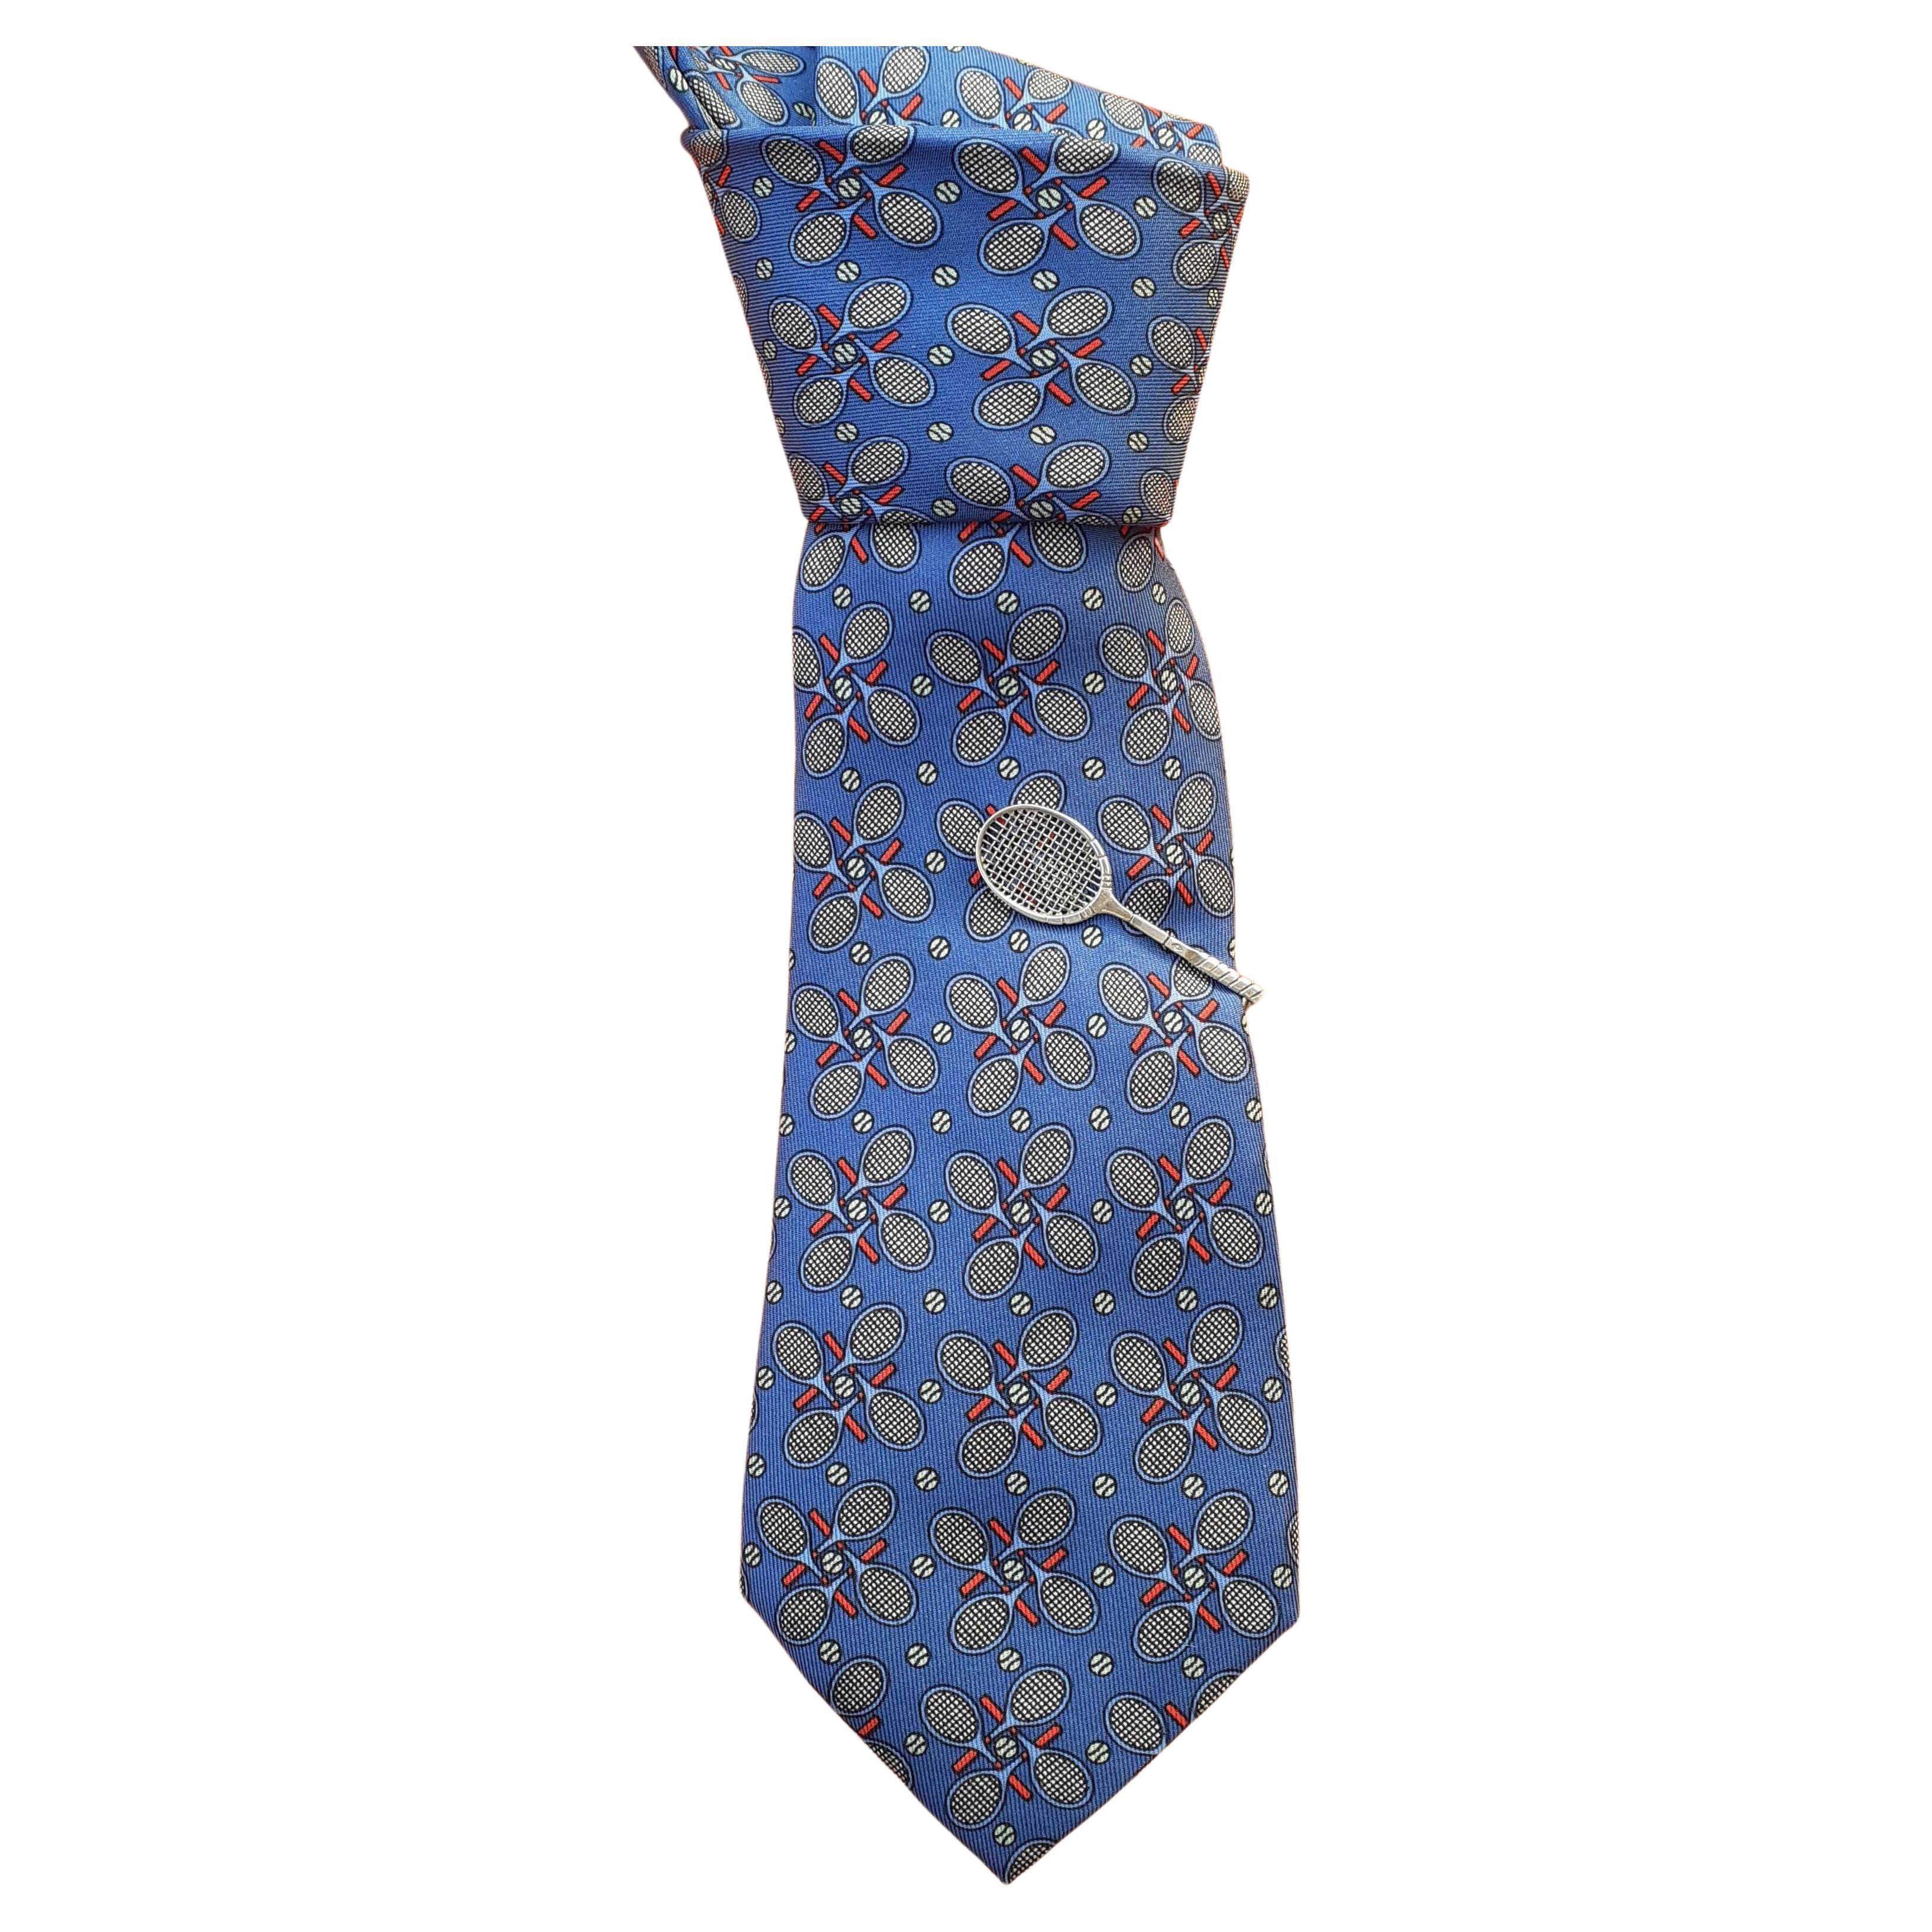 What is the classic Hermès tie?